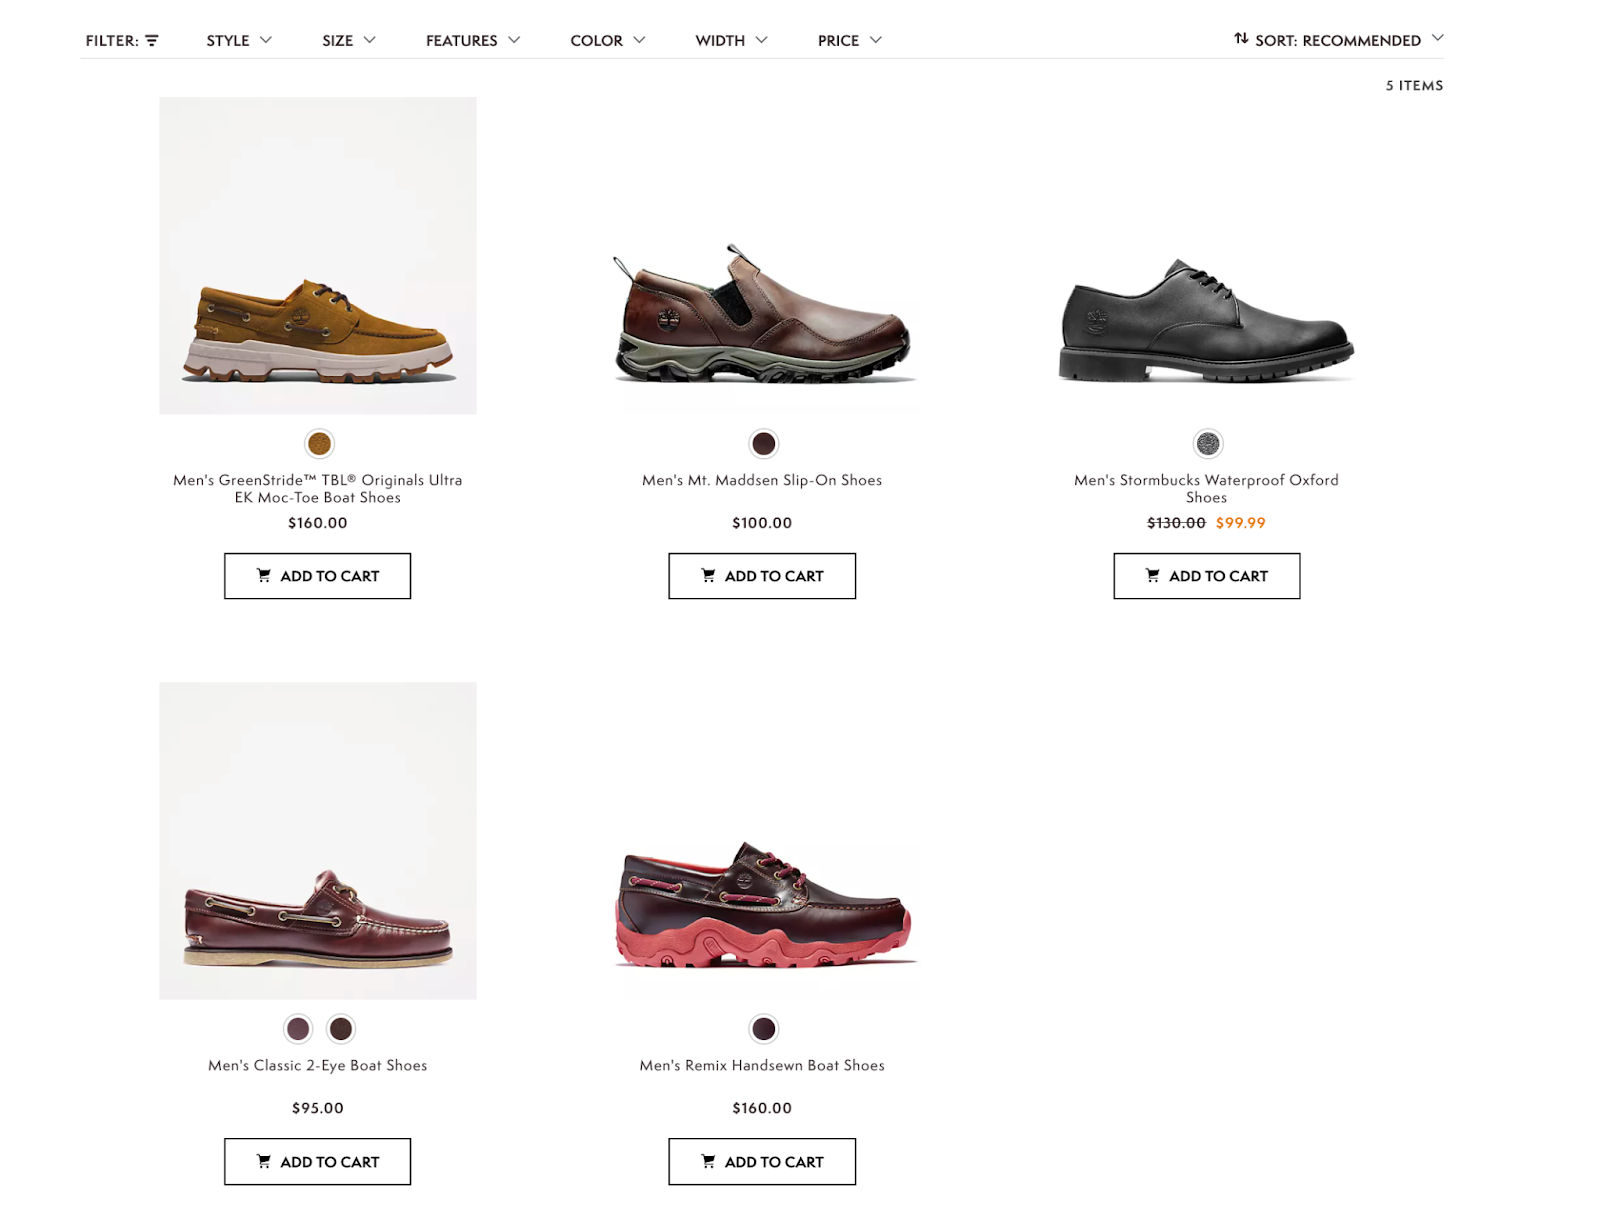 Effective Images for Ecommerce Products - Tips